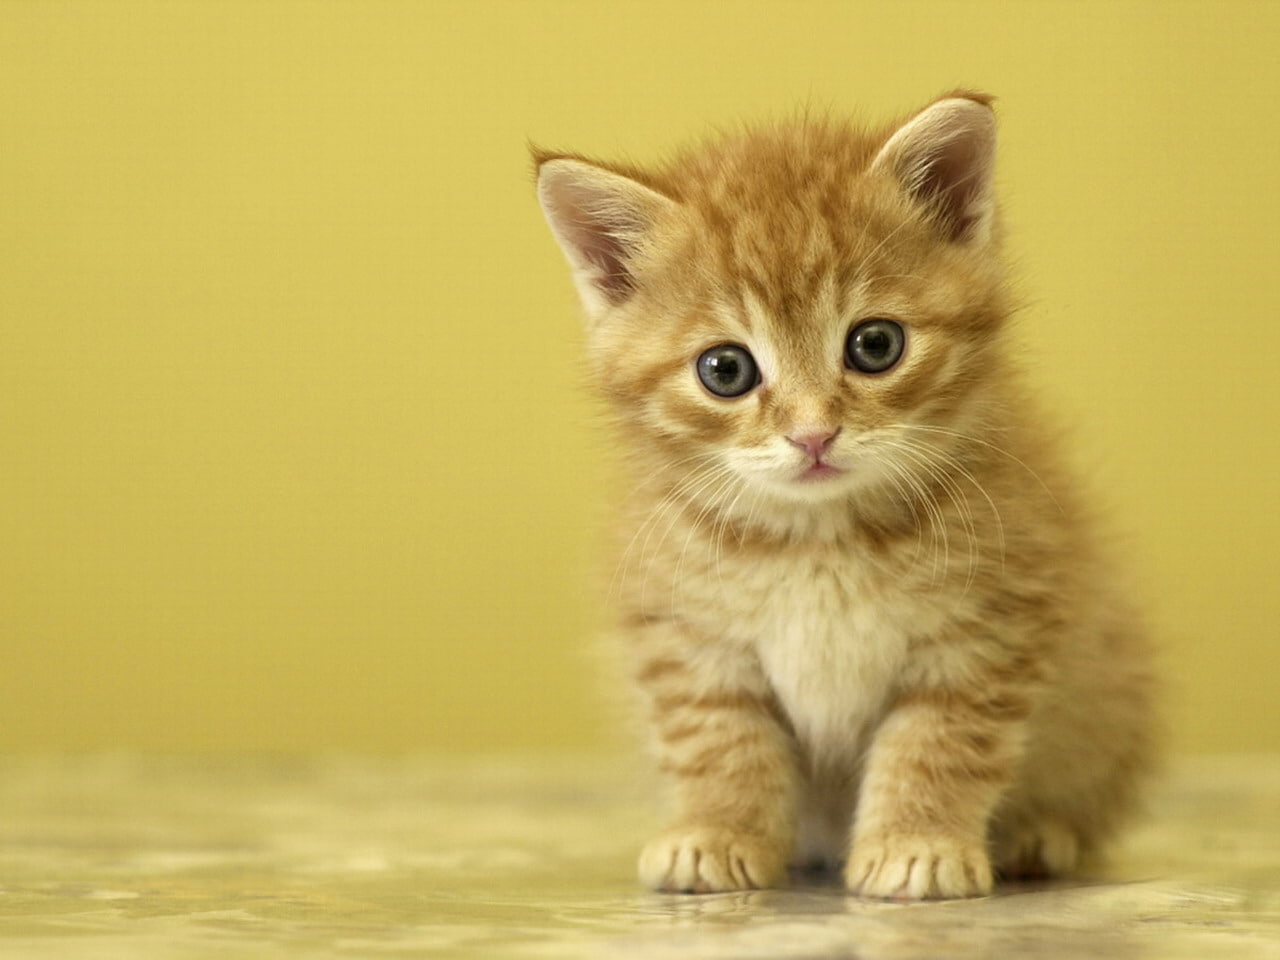 Cute Baby Kittens, Cat, Small, Claws, Adorable, orange tabby kitten